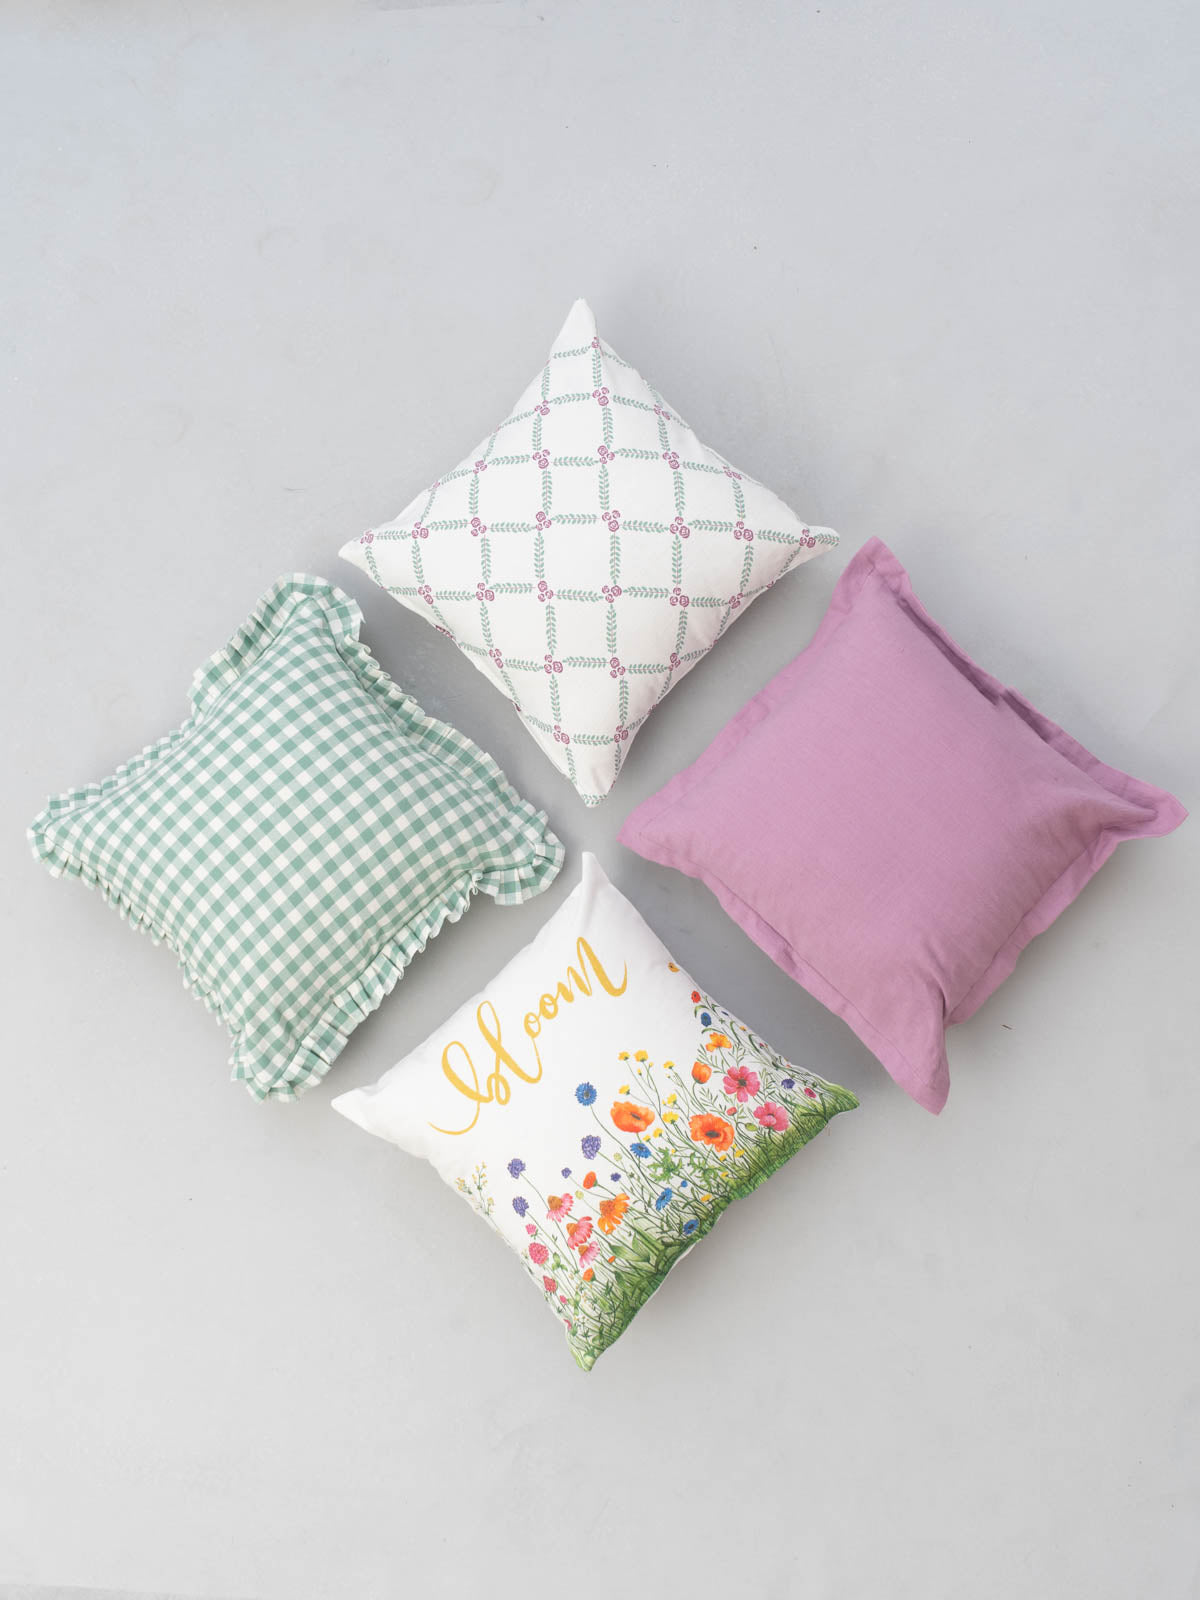 Bloom, Climbing Roses In Lavender, Gingham Sage Green, Dusty Lavender Set Of 4 Combo Cotton Cushion Cover - Lavender, Green